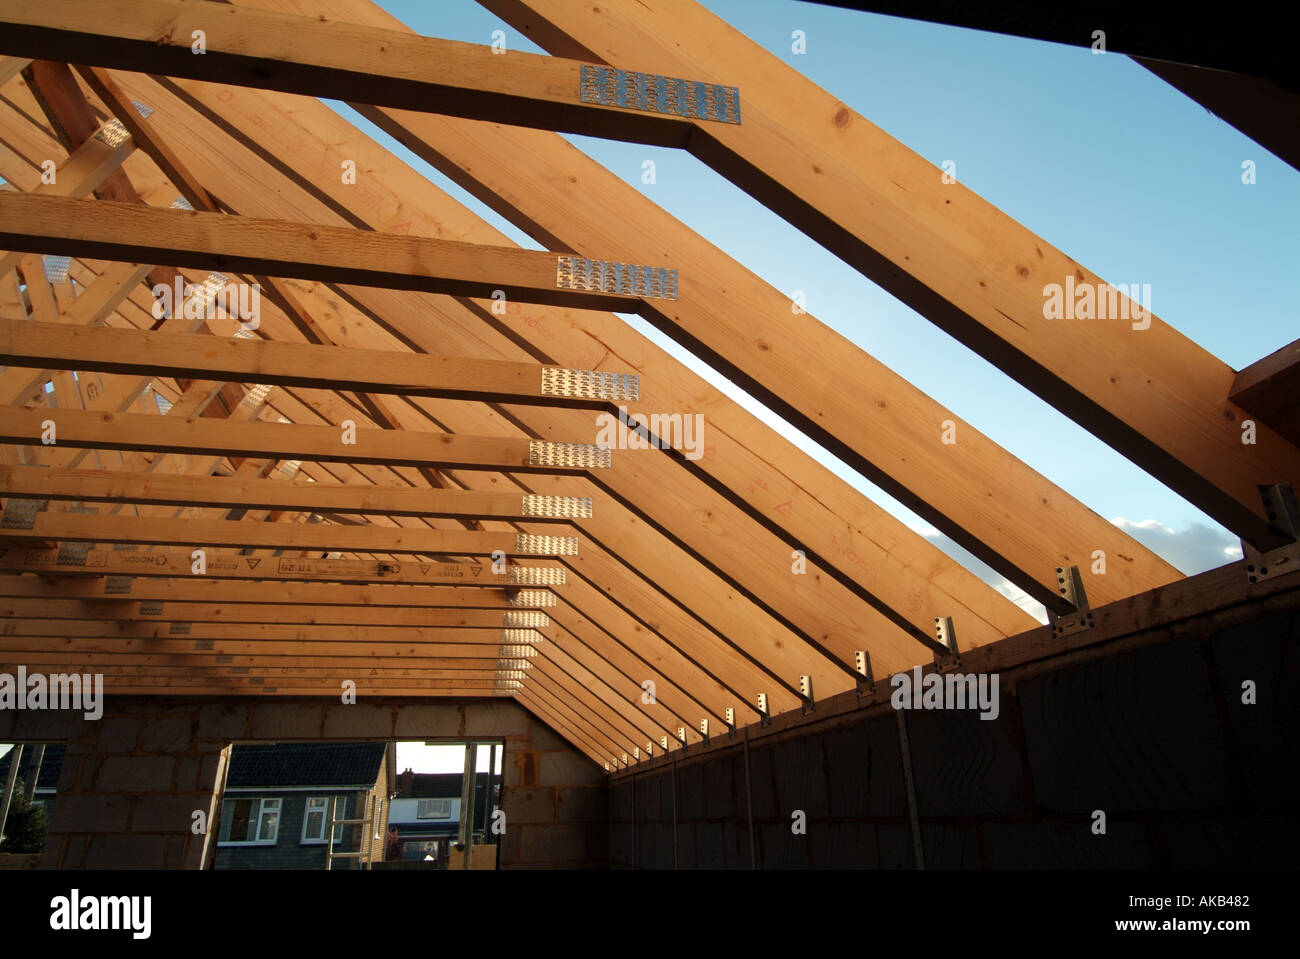 Detached House Under Construction Showing Roof Truss Rafters And